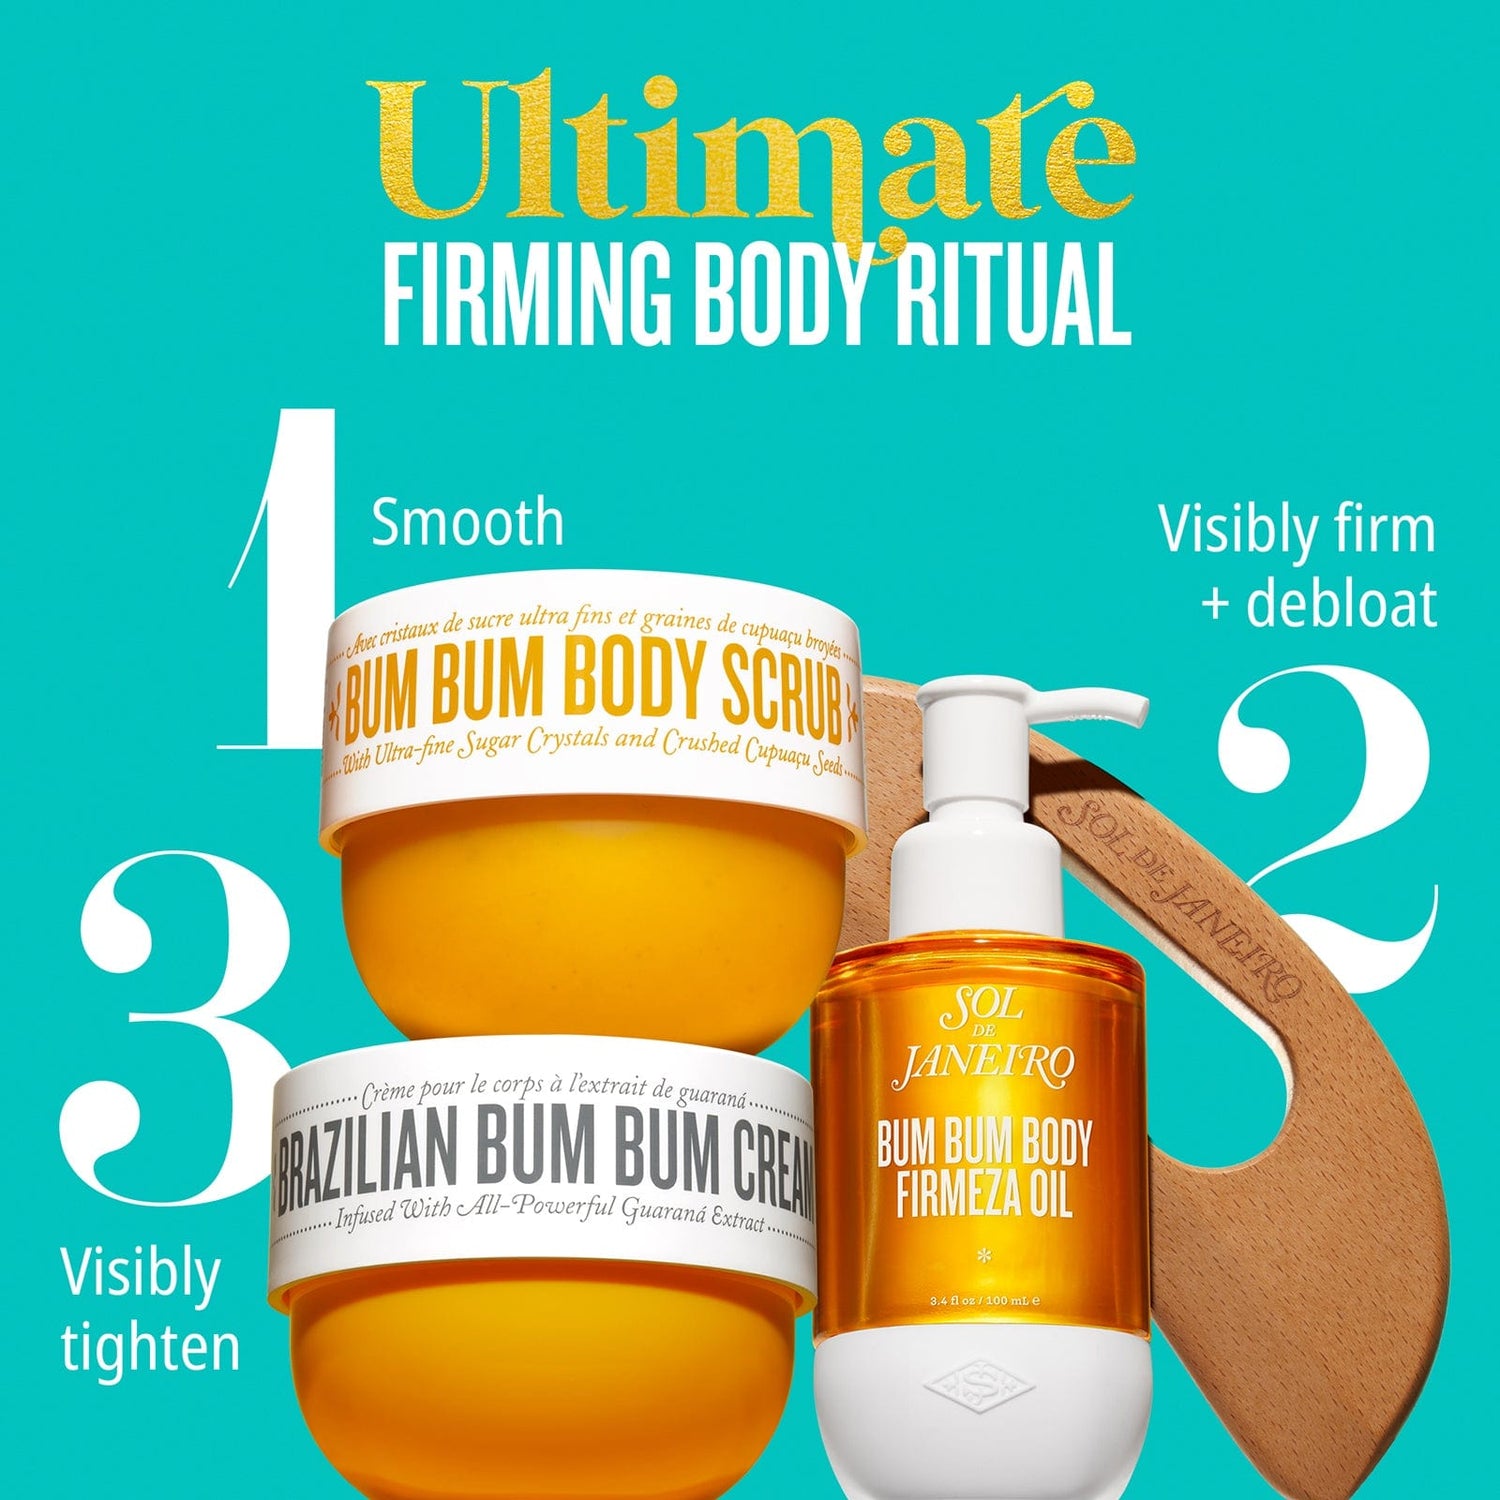 Ultimate firming body ritual - 1. Smooth, 2. Visibly firm + debloat, 3. Visibly Tighten